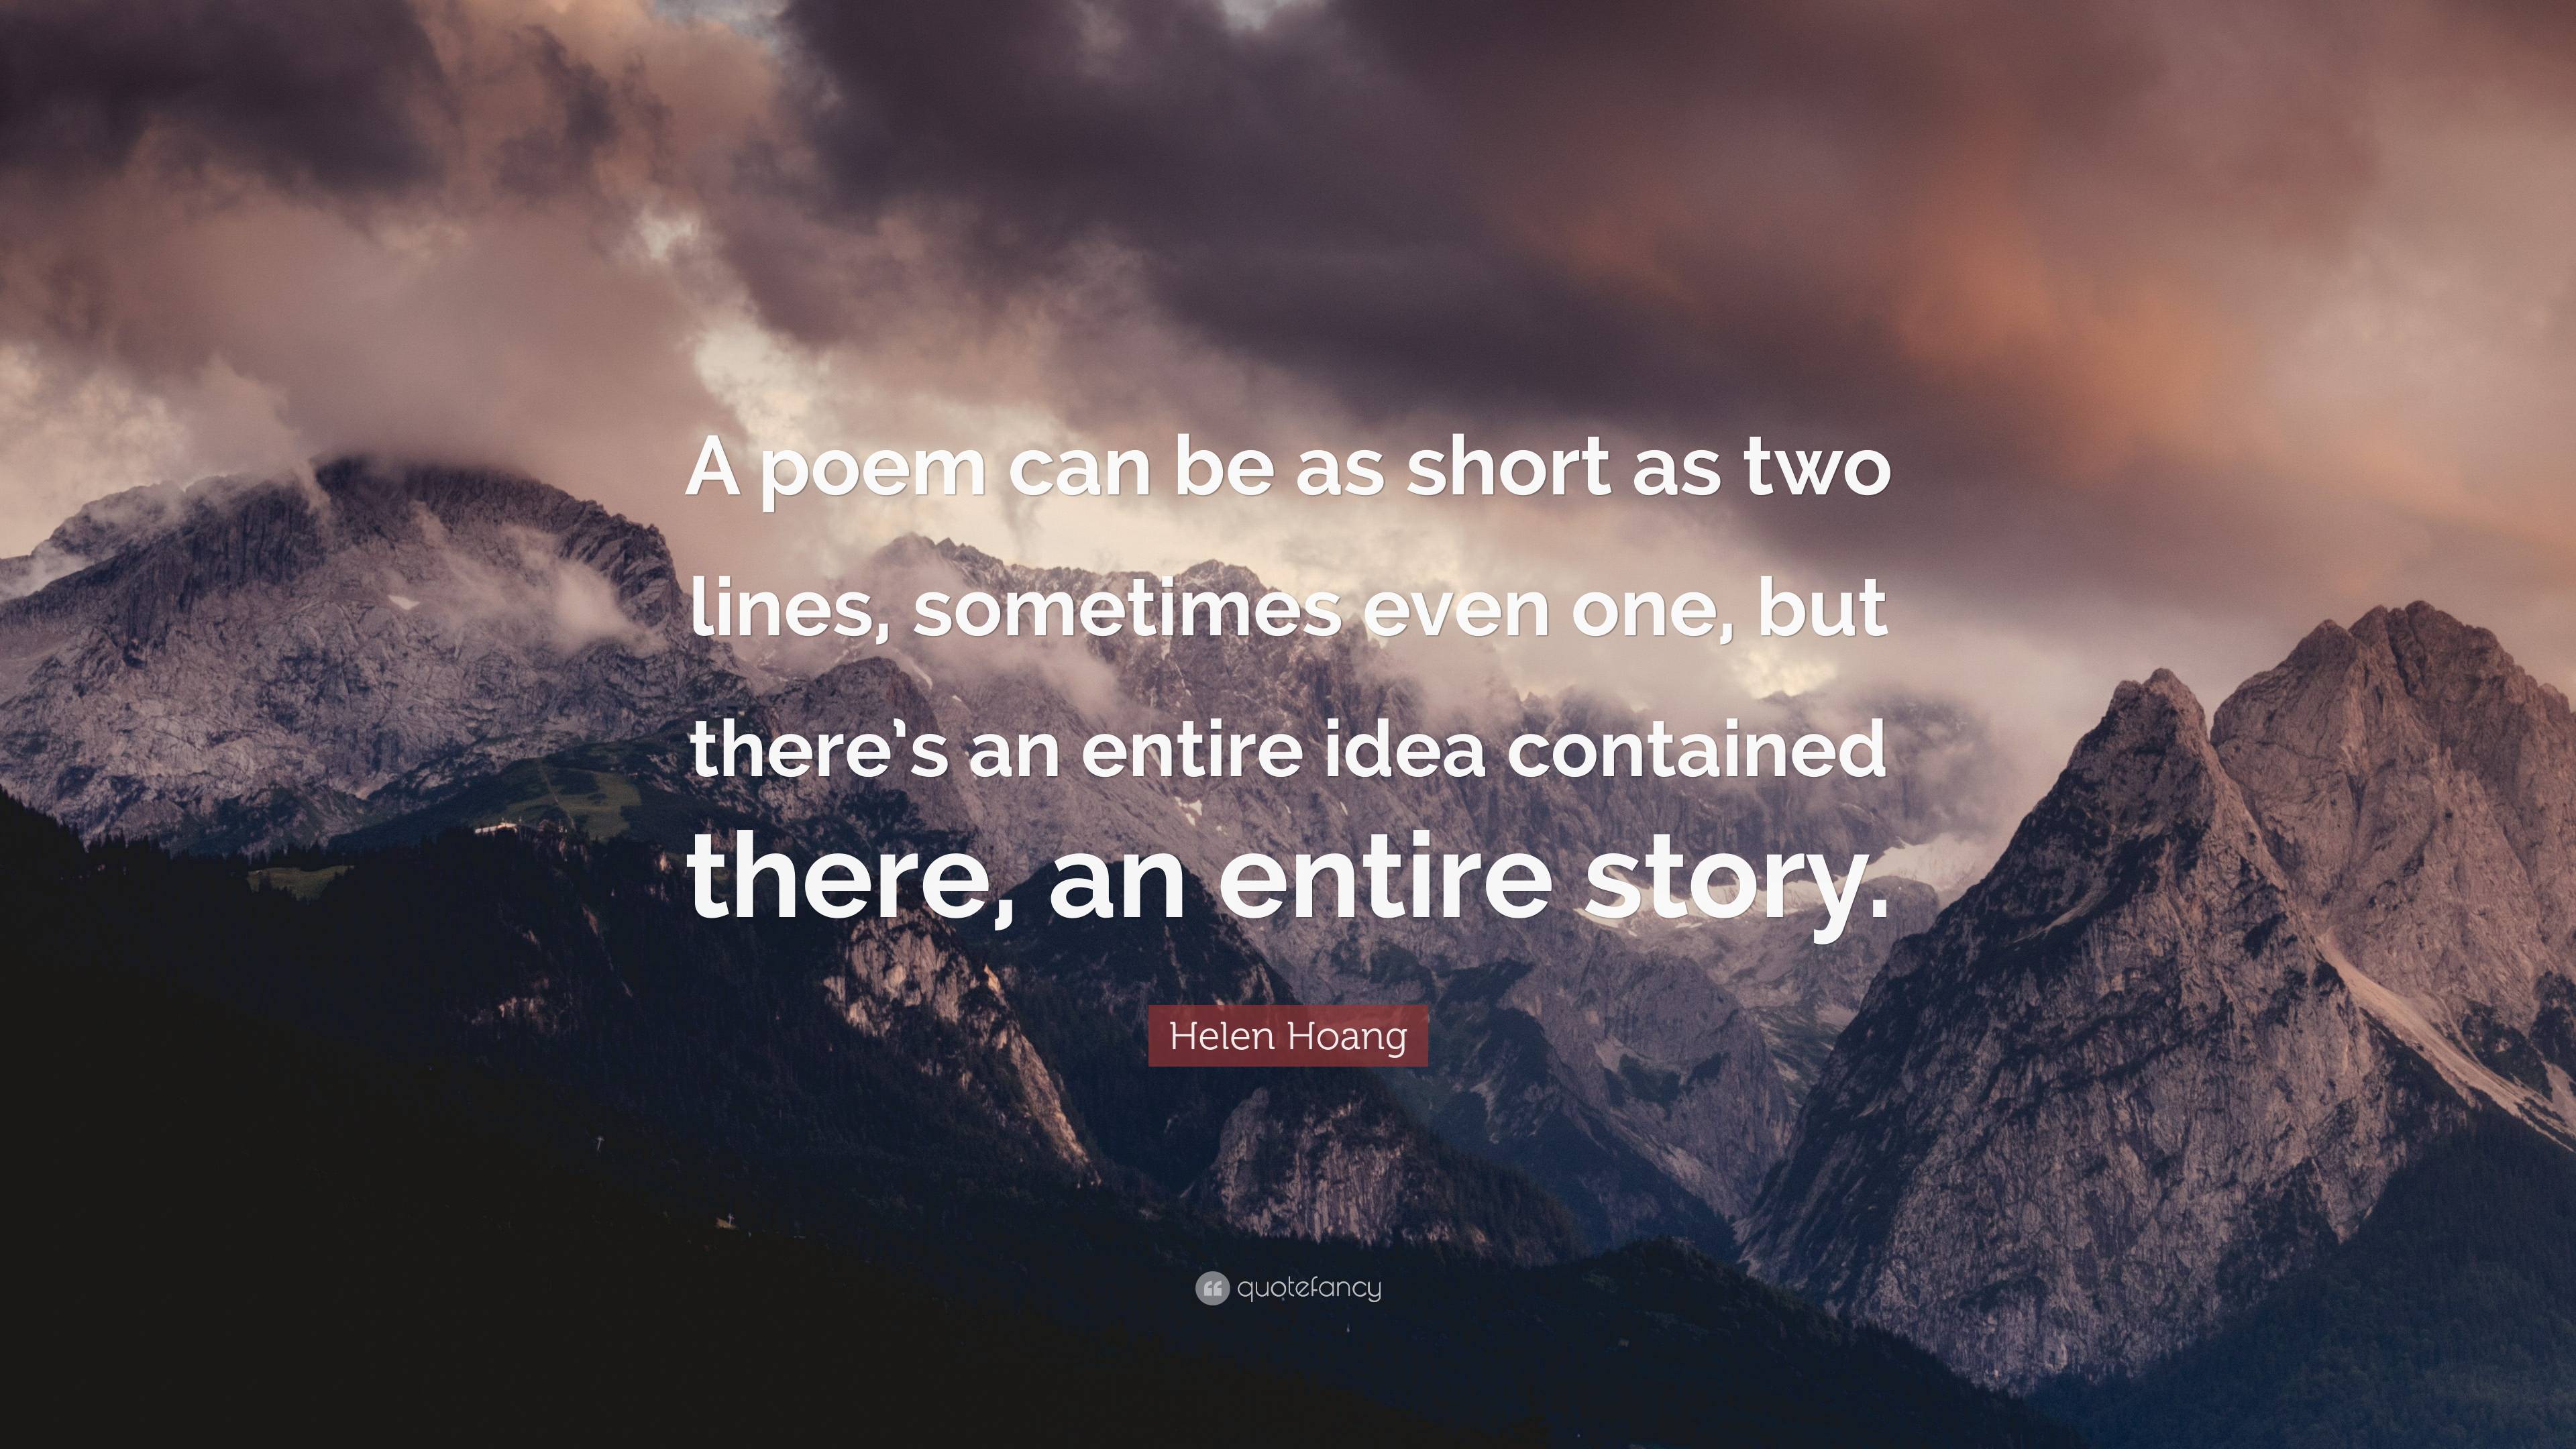 Helen Hoang Quote: “A poem can be as short as two lines, sometimes even ...